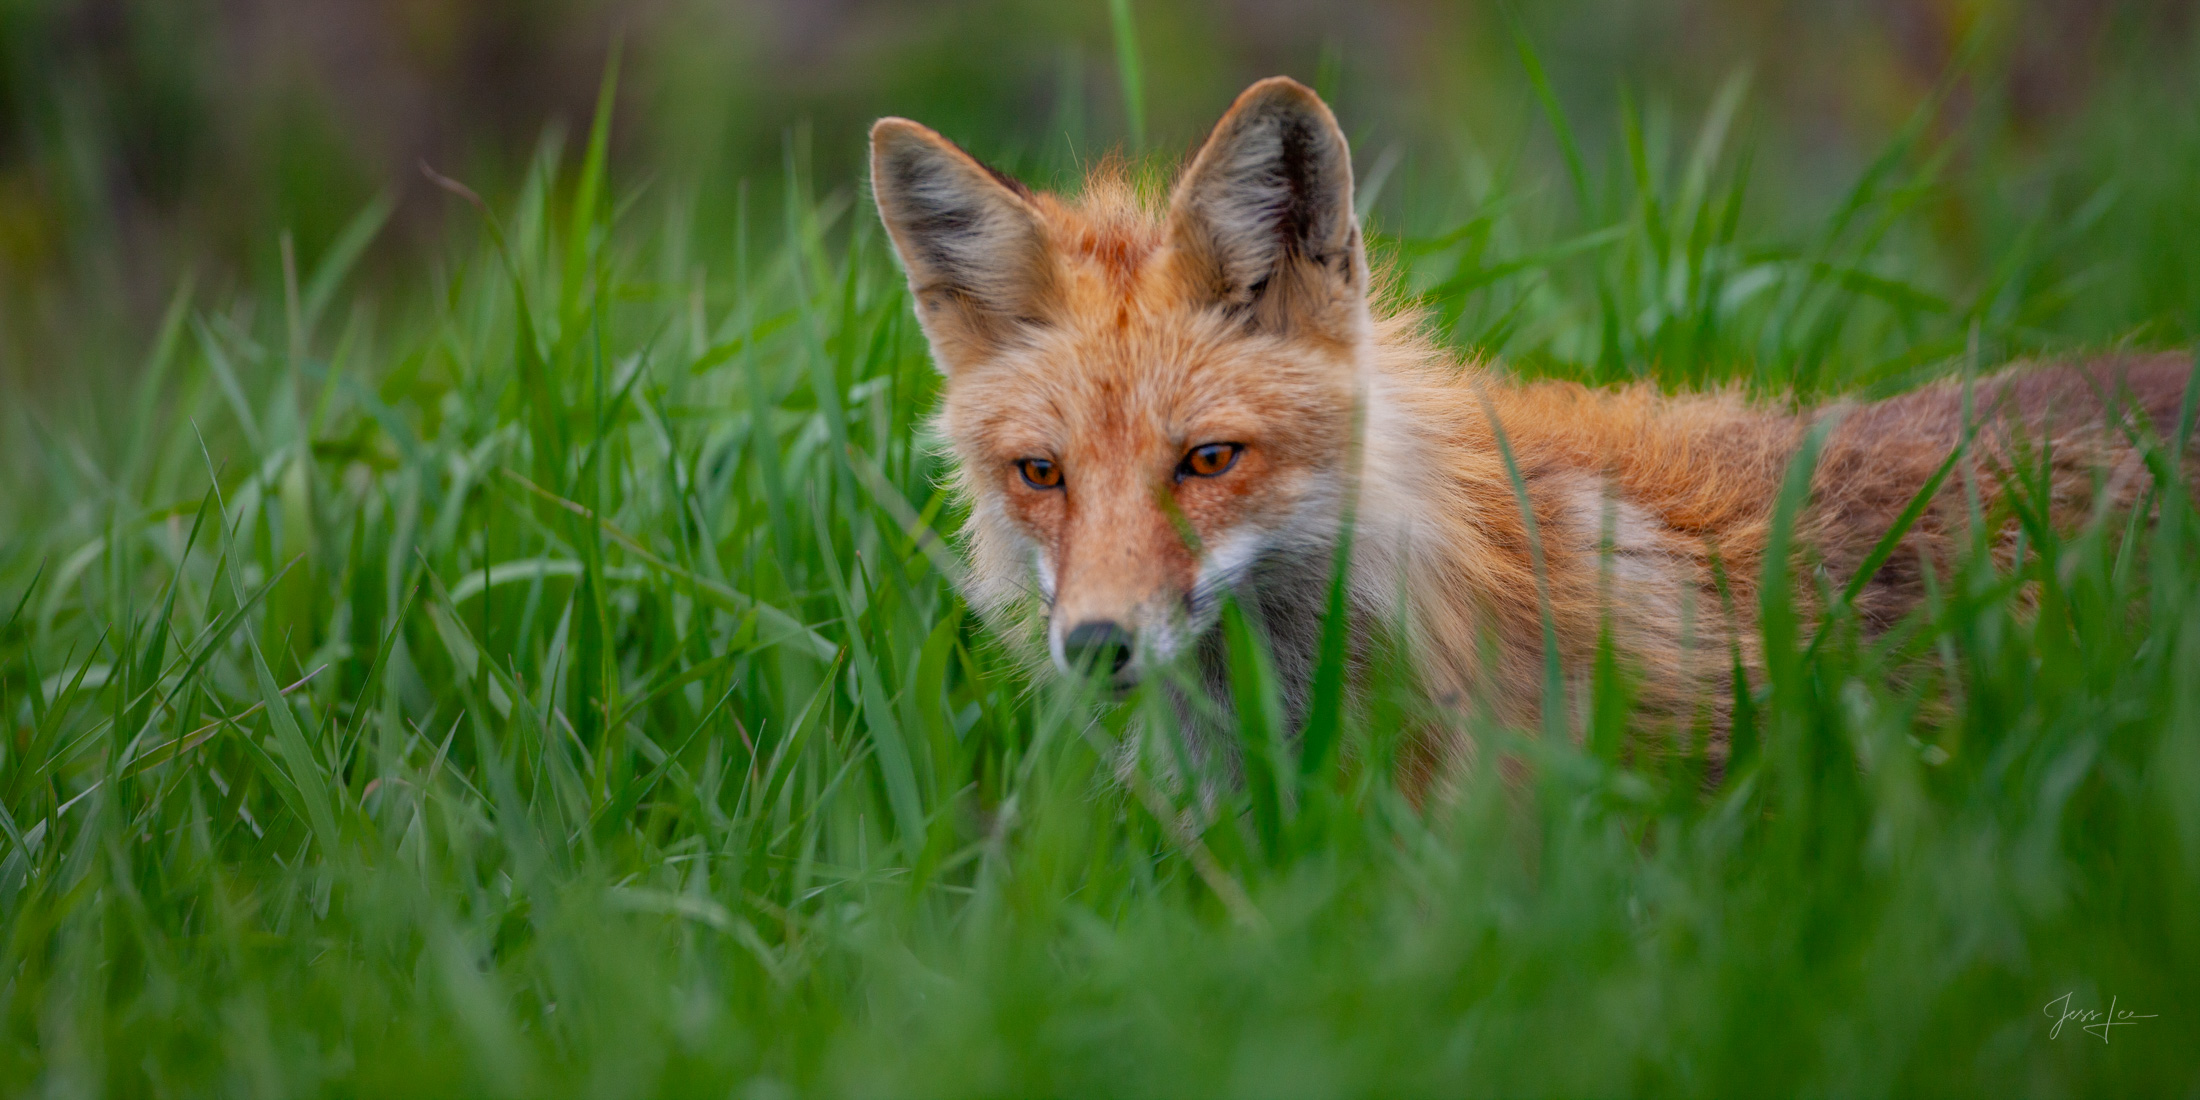 Fox Photo 2 presented in Limited Edition of 250 Exclusive high-resolution Museum Quality Fine Art Prints. Wildlife Photo of a...